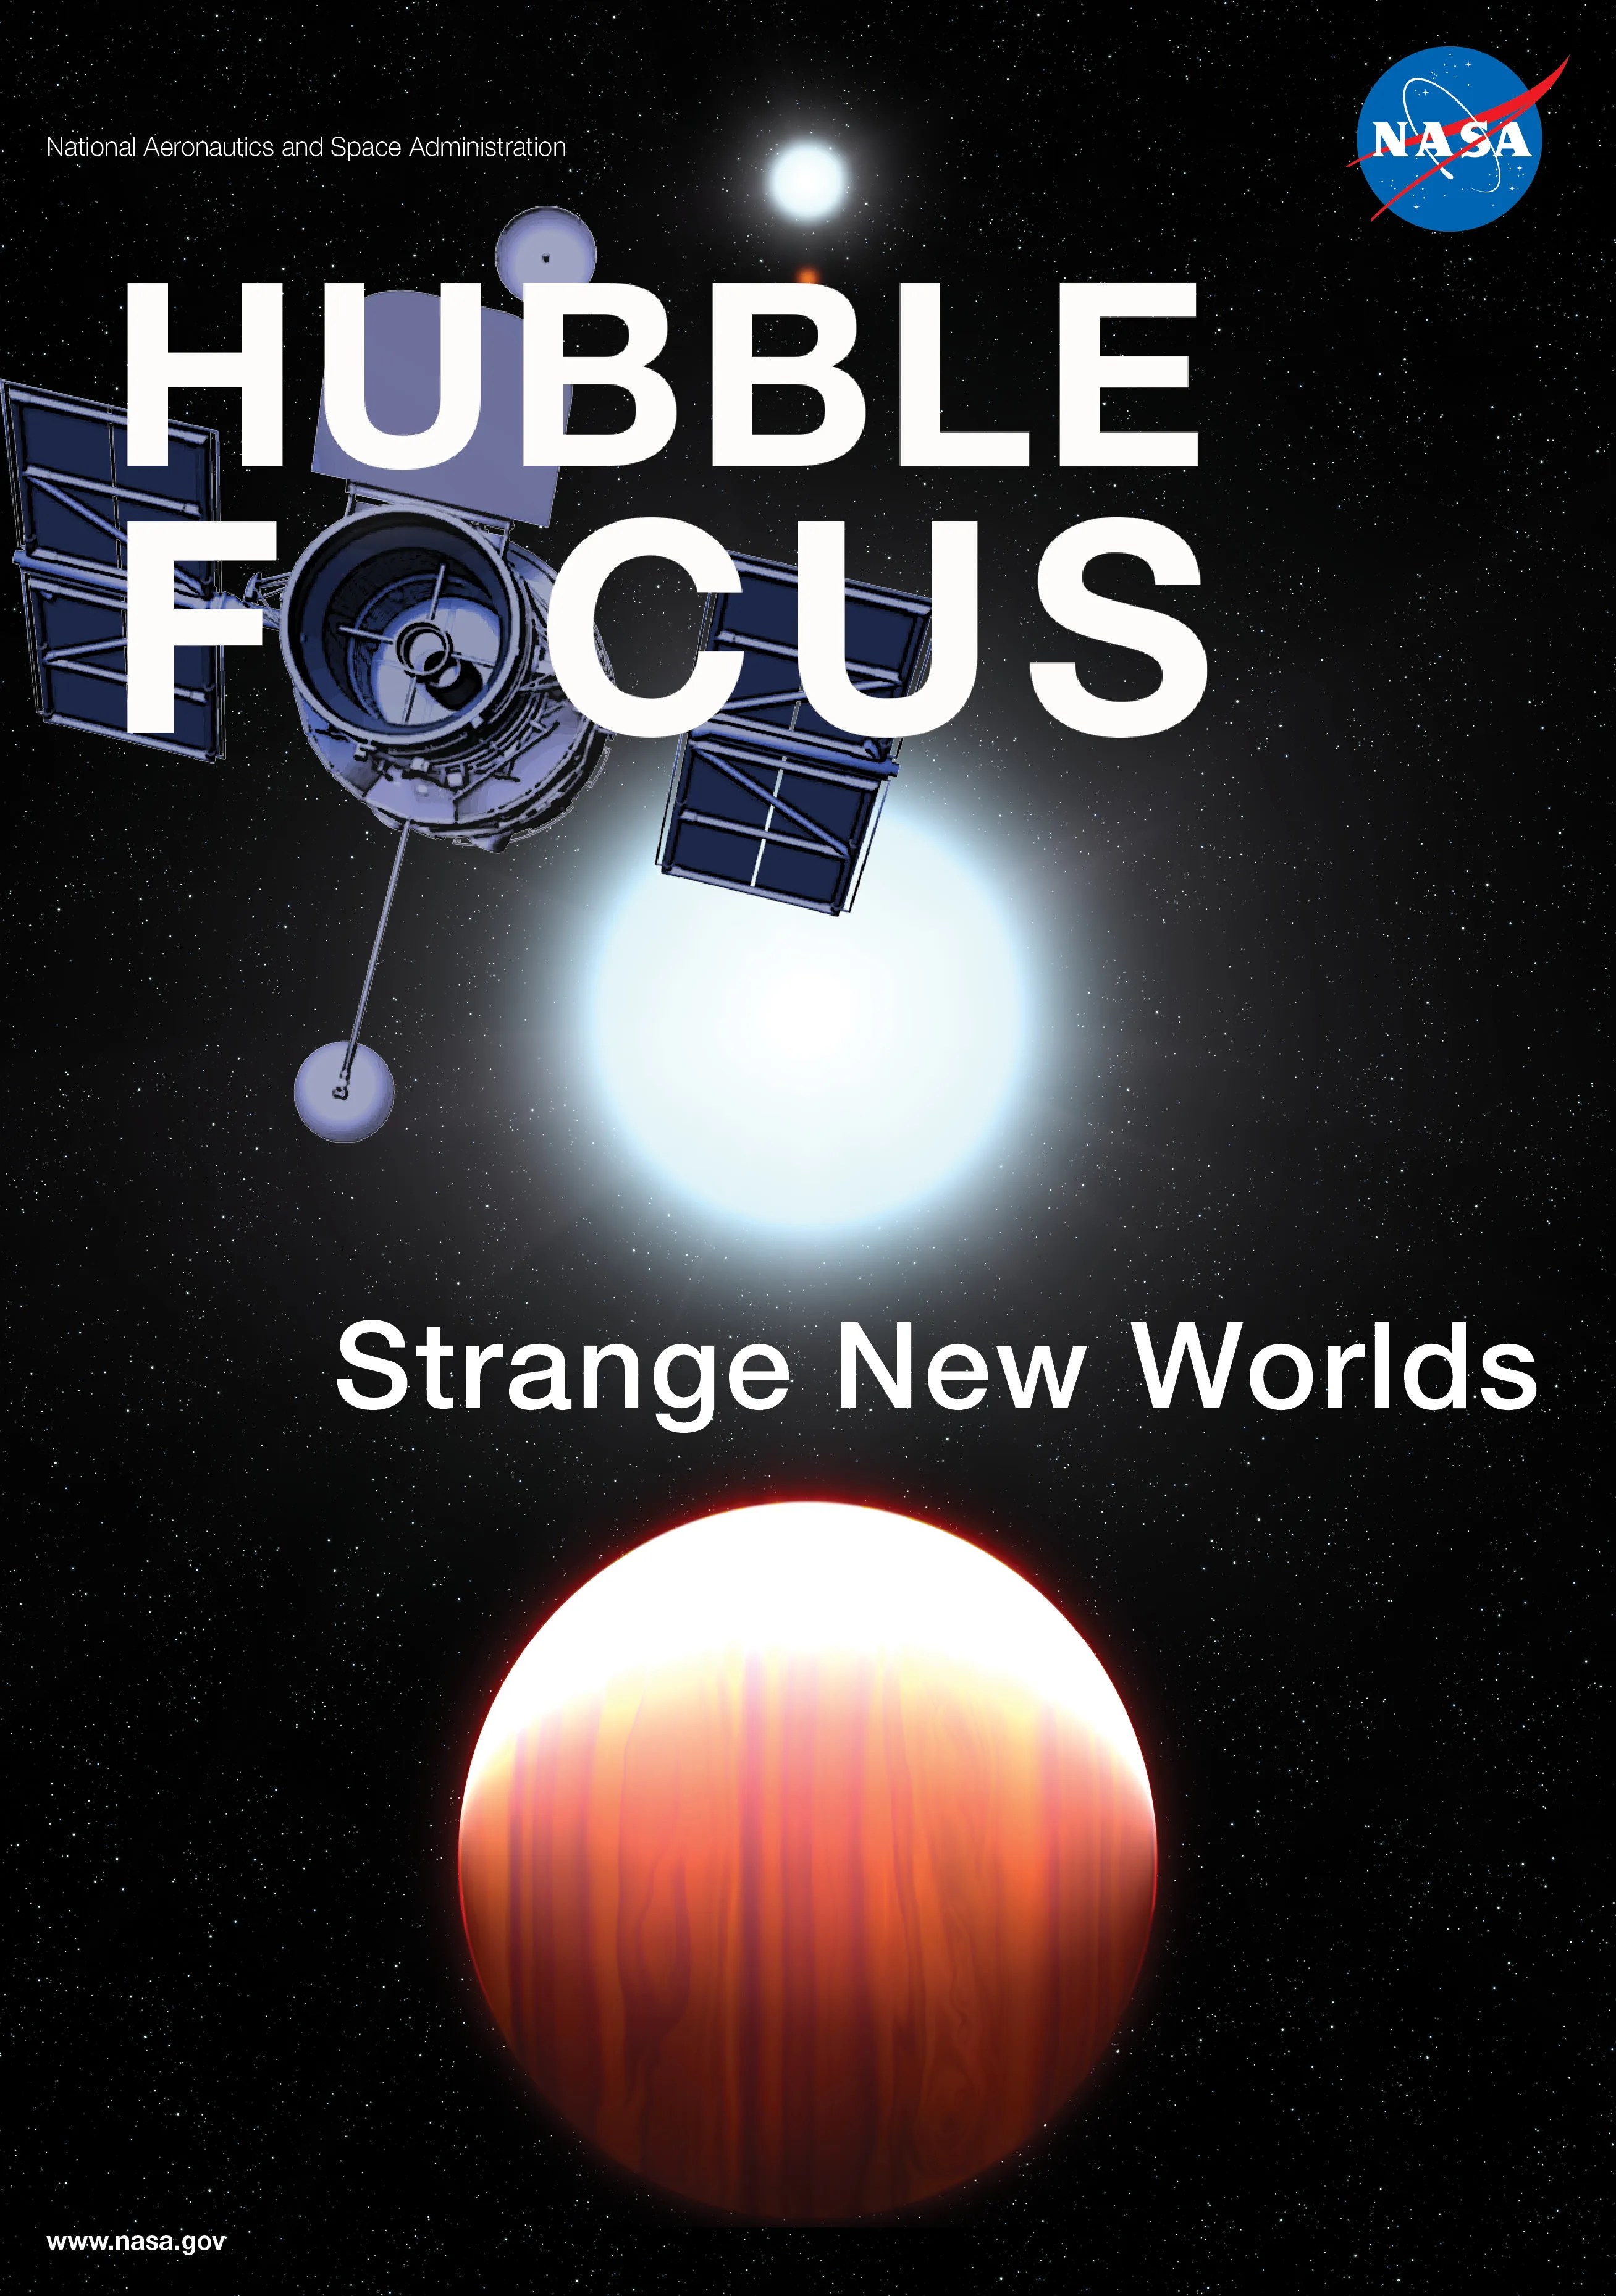 Upper left: "Hubble Focus" opening of the telescope is the "O" Center: bright-white star, Center Bottom: Orange-red planet with cloud bands, Center: small, bright-white star and very small red-orange dwarf star